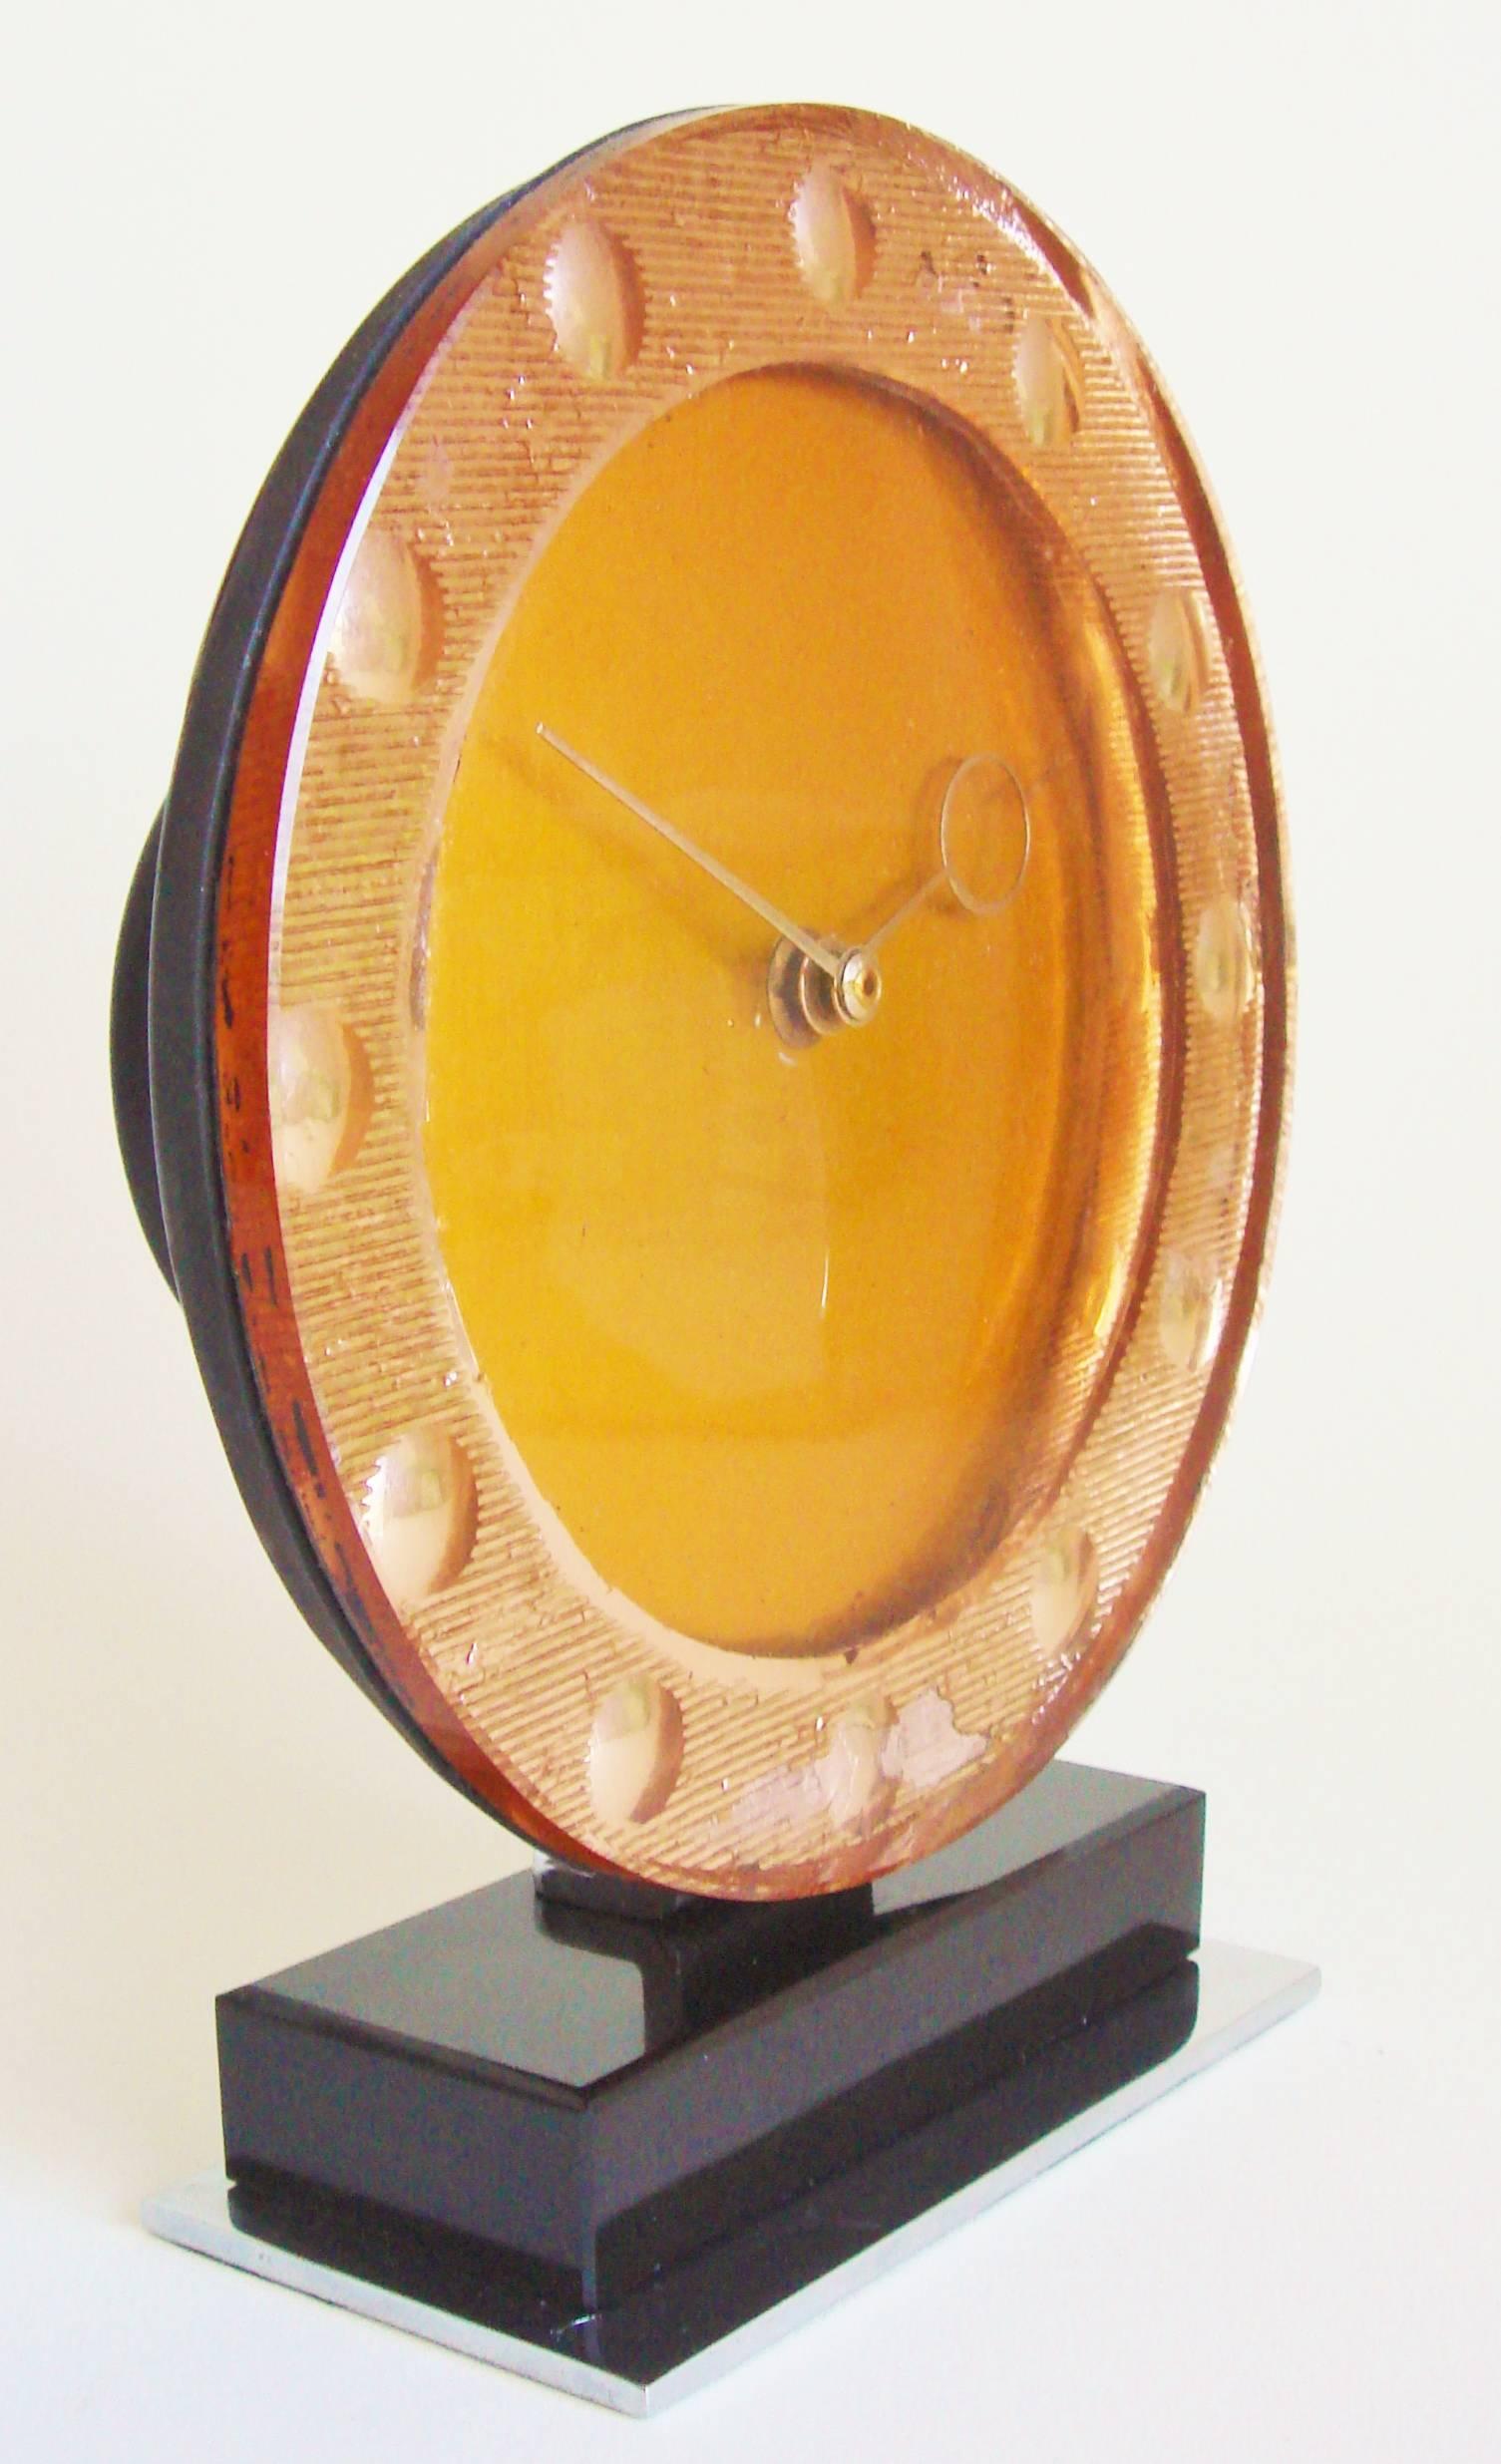 This stunning English Art Deco table clock features a thick glass face covering a silvered peach foiled bezel with reverse-cut dome numerals. The very Art Deco styled brass hands would seem to identify the unsigned clock as having been made by